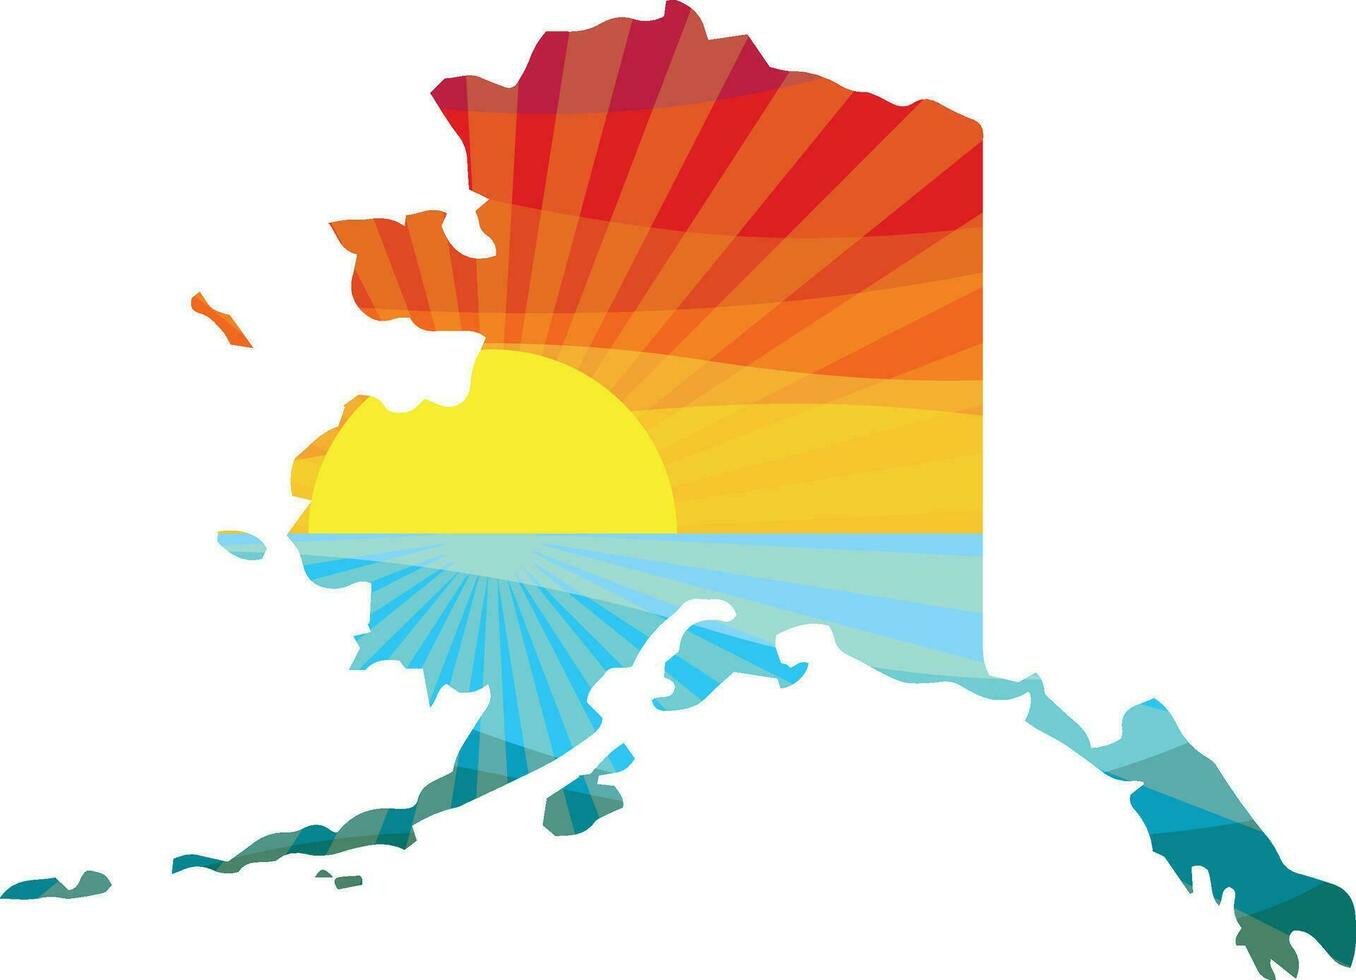 Colorful Sunset Outline of Alaska Vector Graphic Illustration Icon